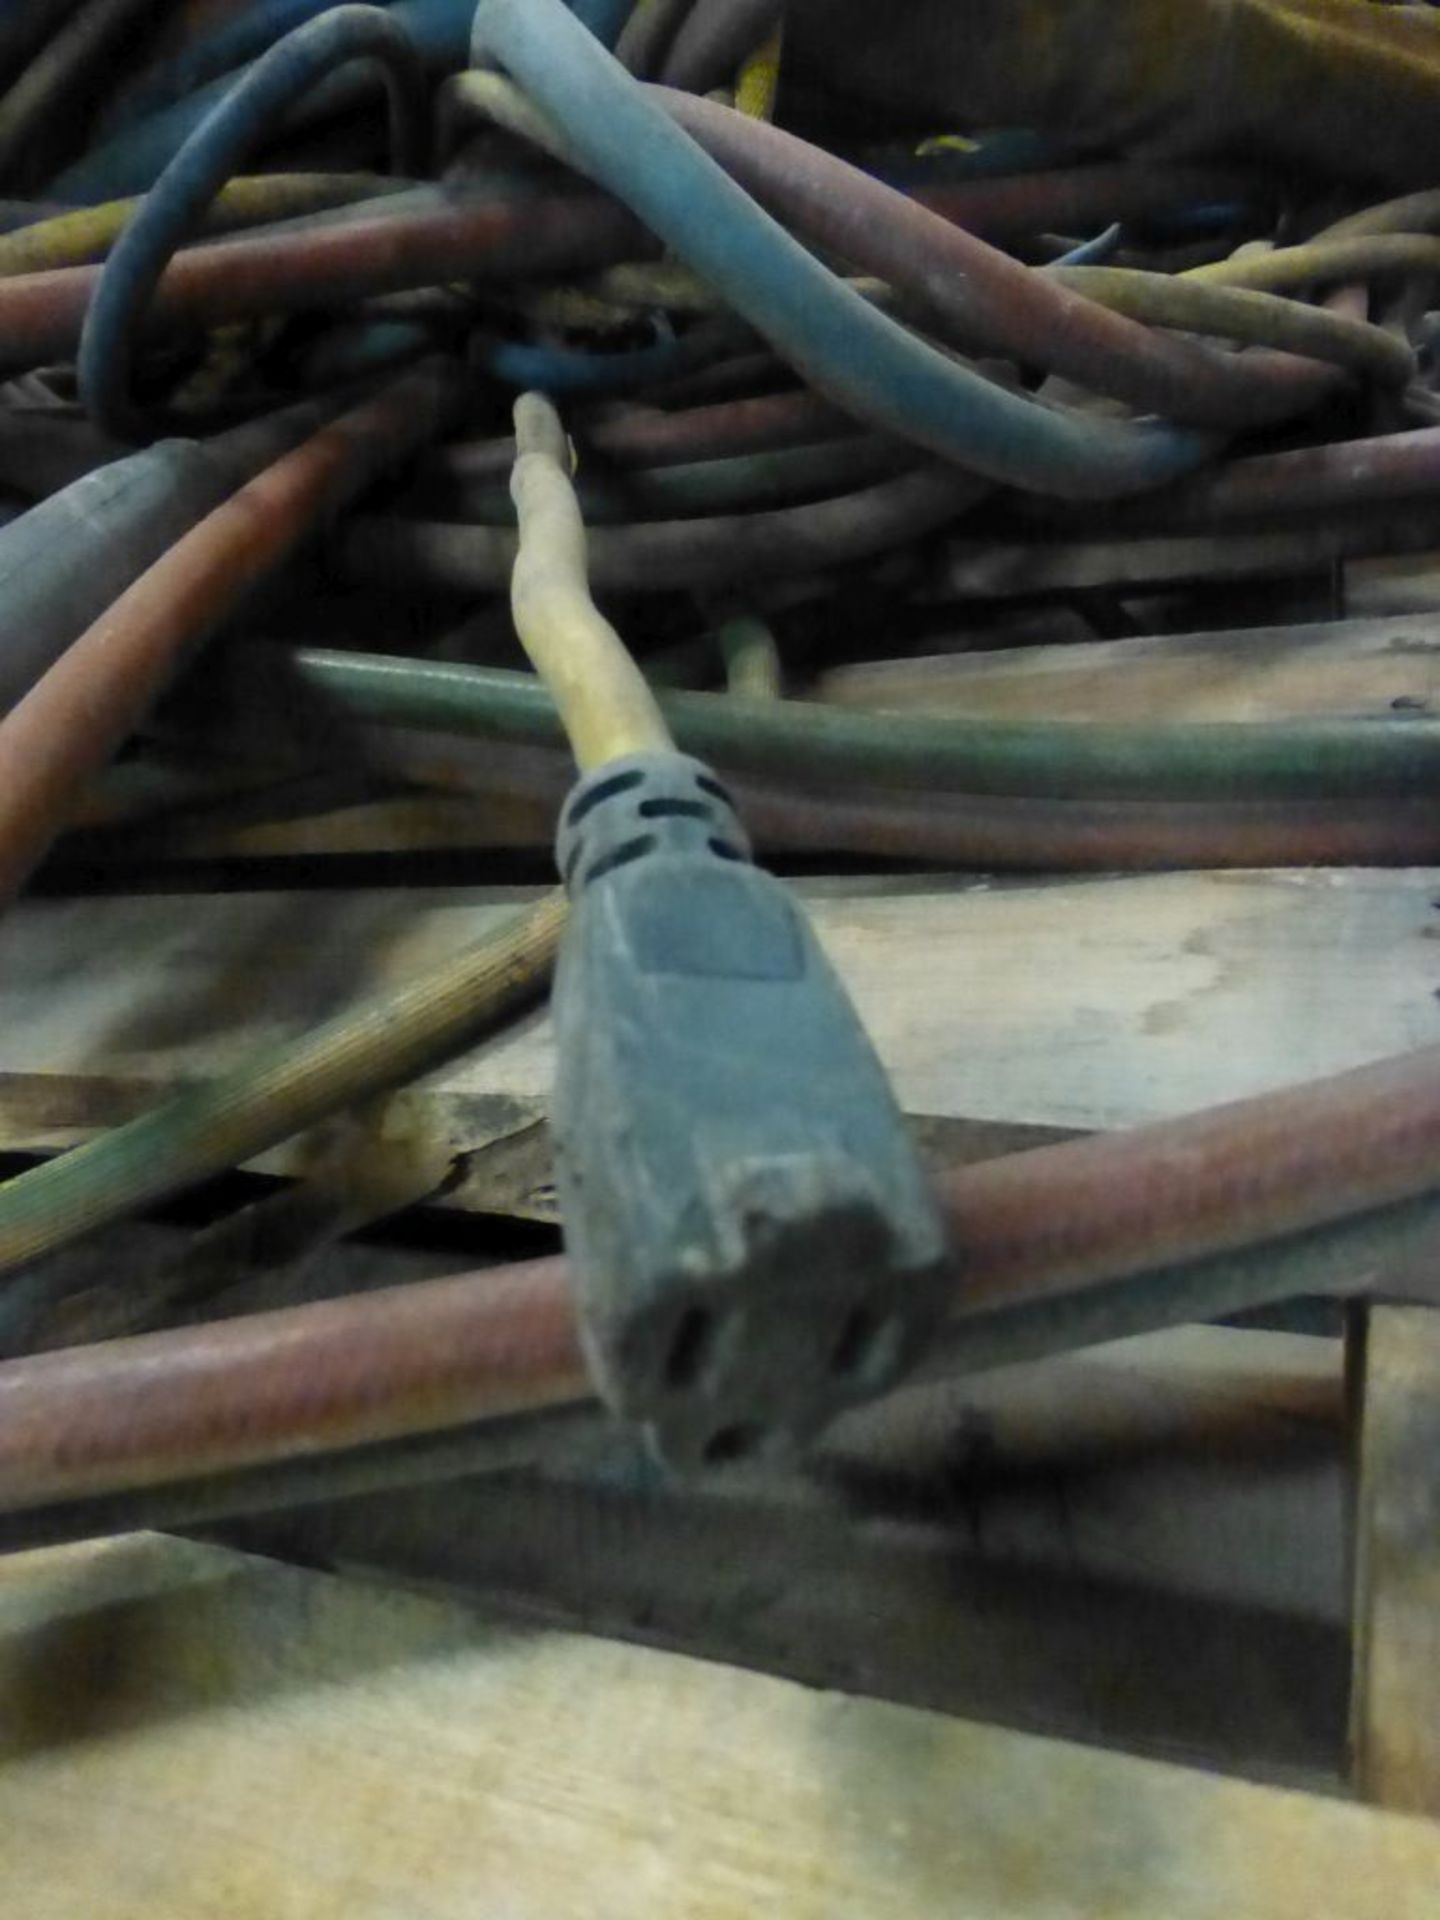 Lot of (10) 50' Welding Leads | 362 lbs; Majority are 2/0 - Image 7 of 7